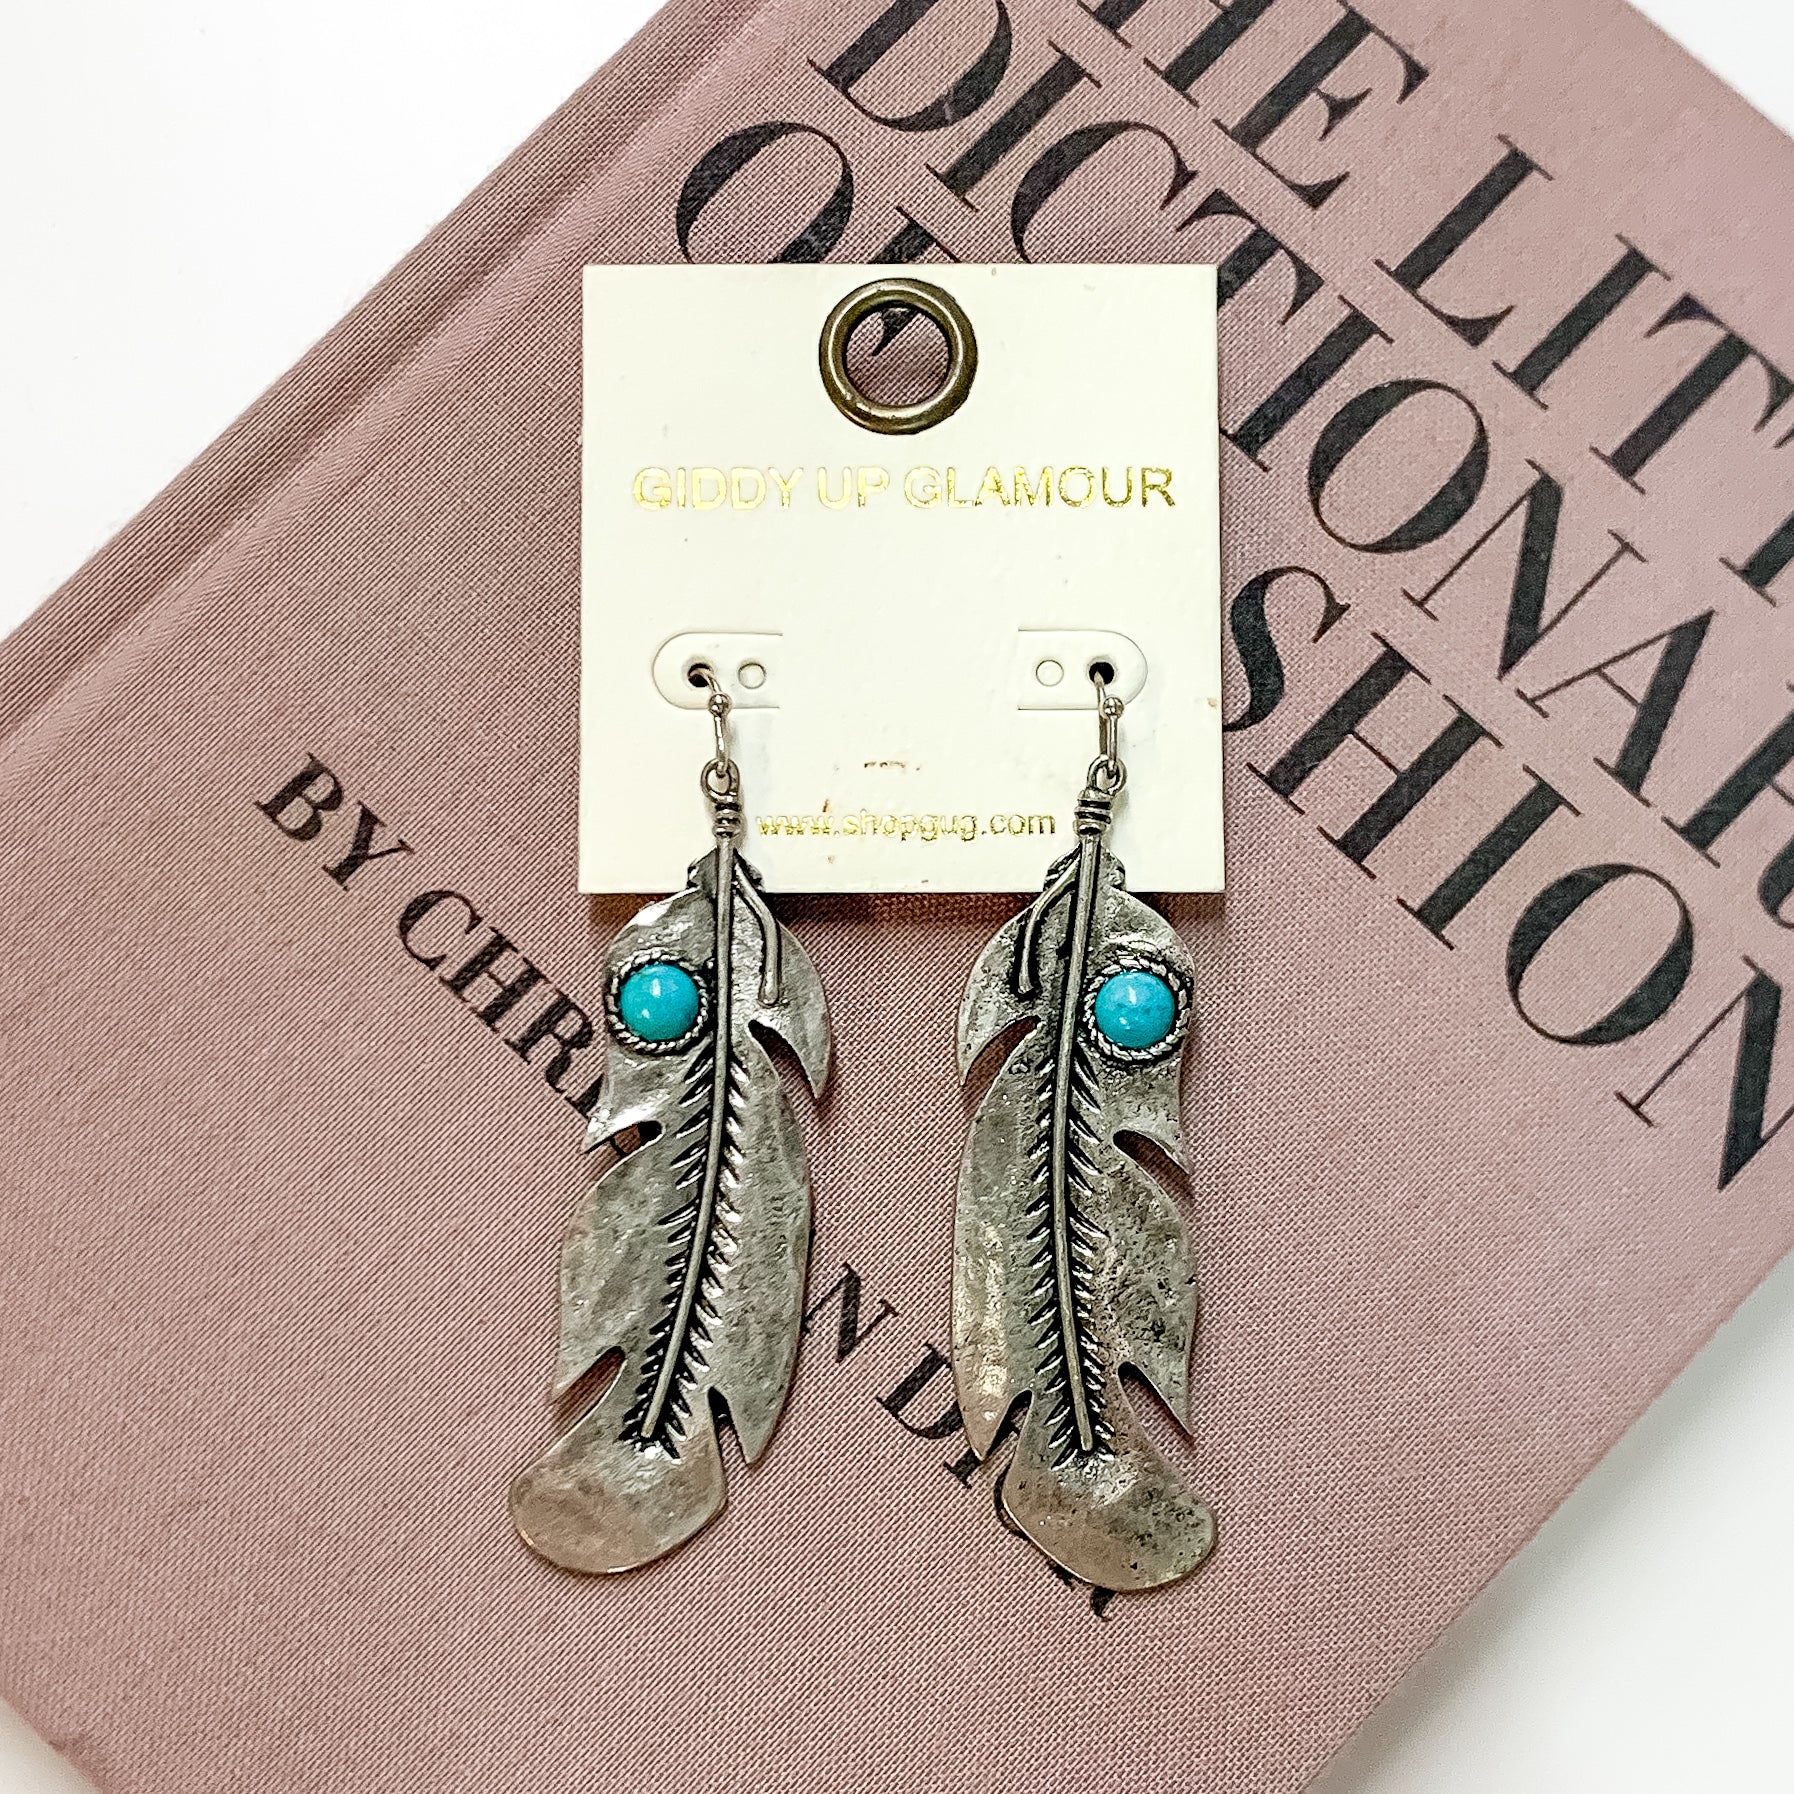 Silver Tone Feather Drop Earrings with Turquoise Blue Stones - Giddy Up Glamour Boutique